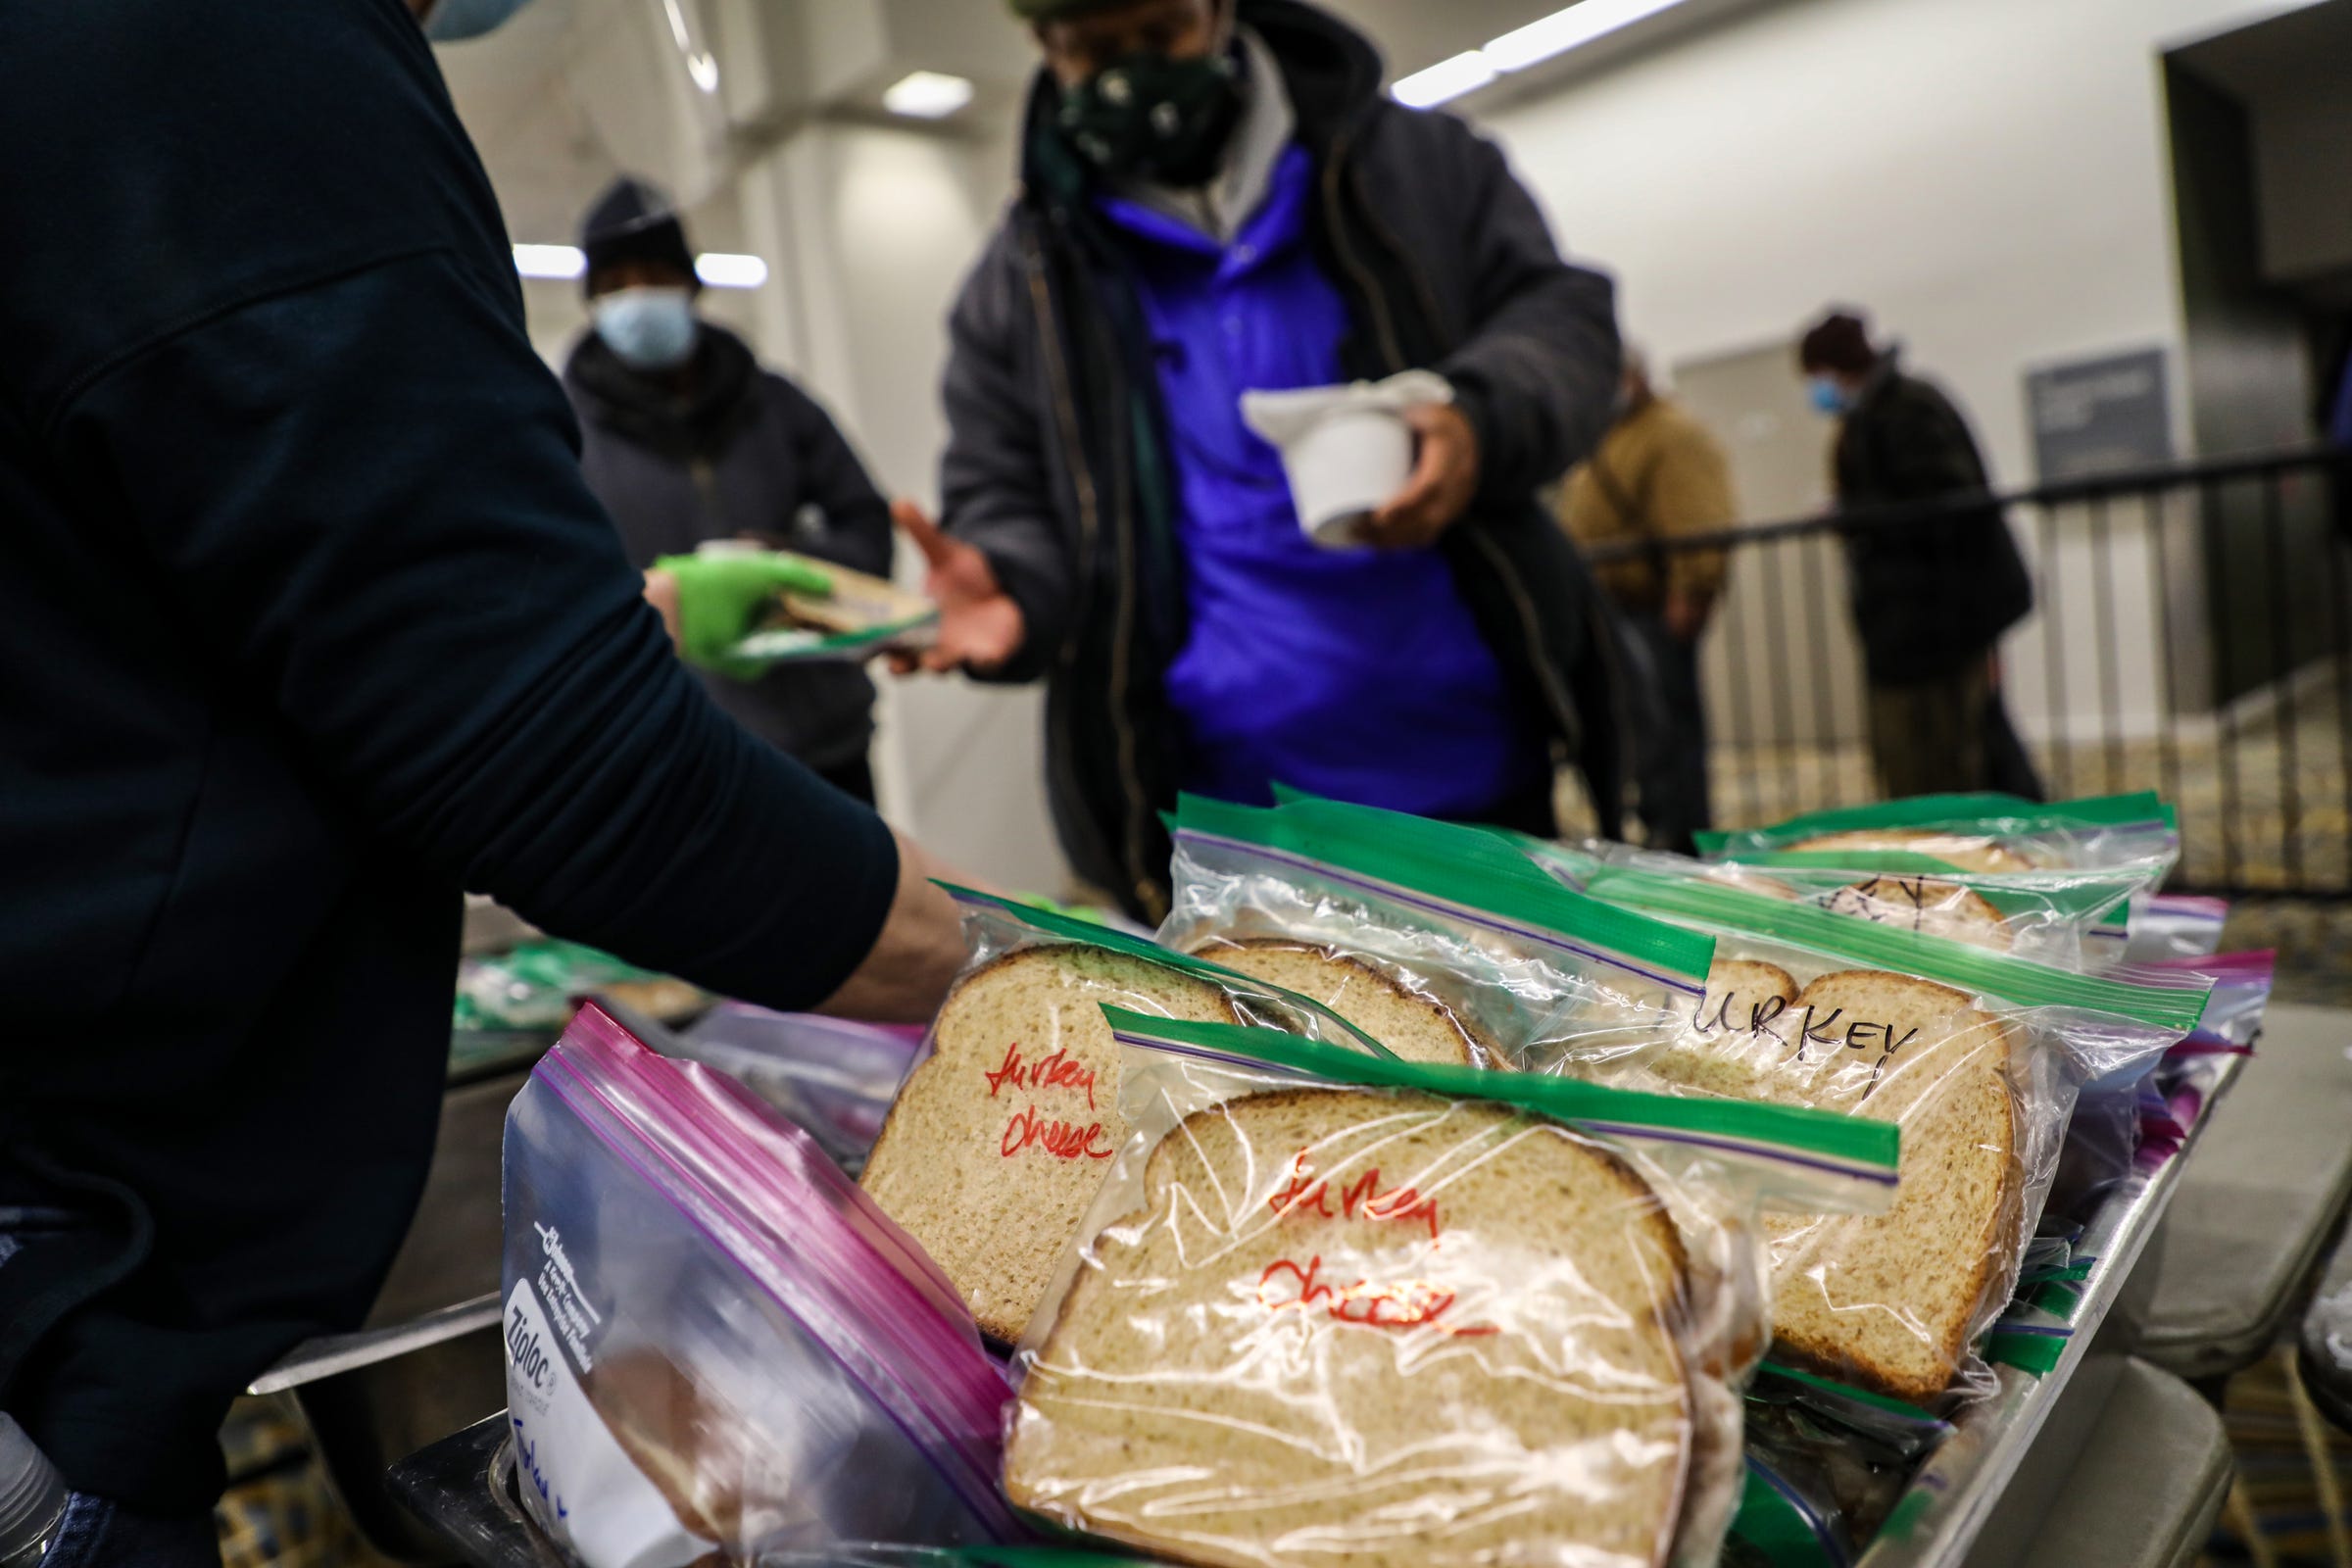 People wait in line behind a barrier to receive one of the two meals served by the Pope Francis Center temporarily relocated at the TCF Center in downtown Detroit to better accommodate the homeless population it serves during the coronavirus pandemic on Dec. 8, 2020.